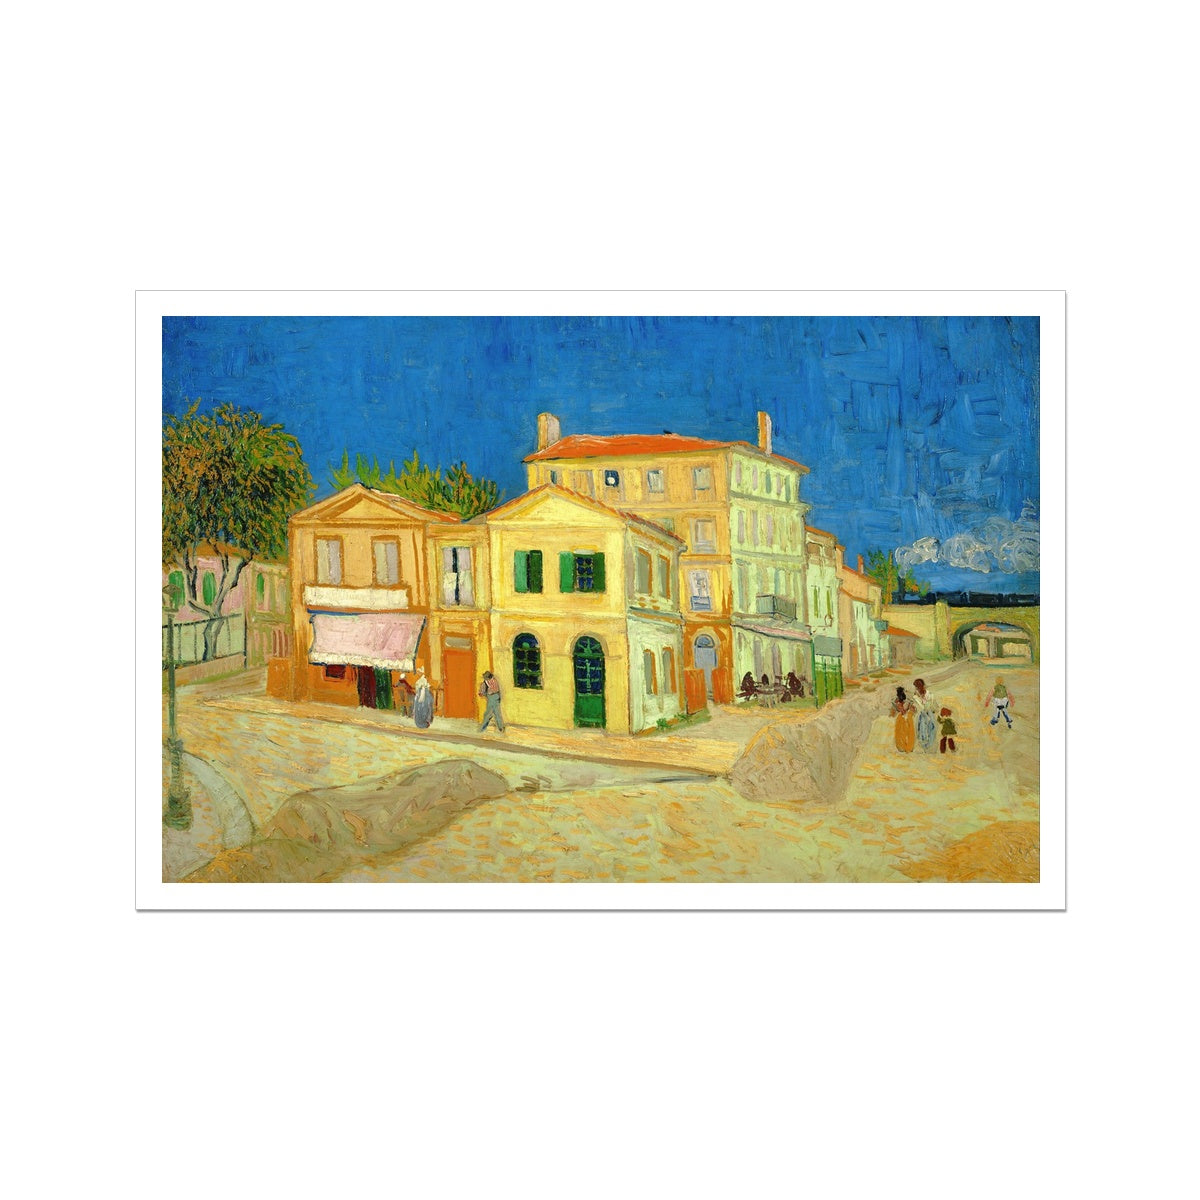 'The Yellow House' by Vincent Van Gogh. Open Edition Fine Art Print. Art Gallery Historic Art